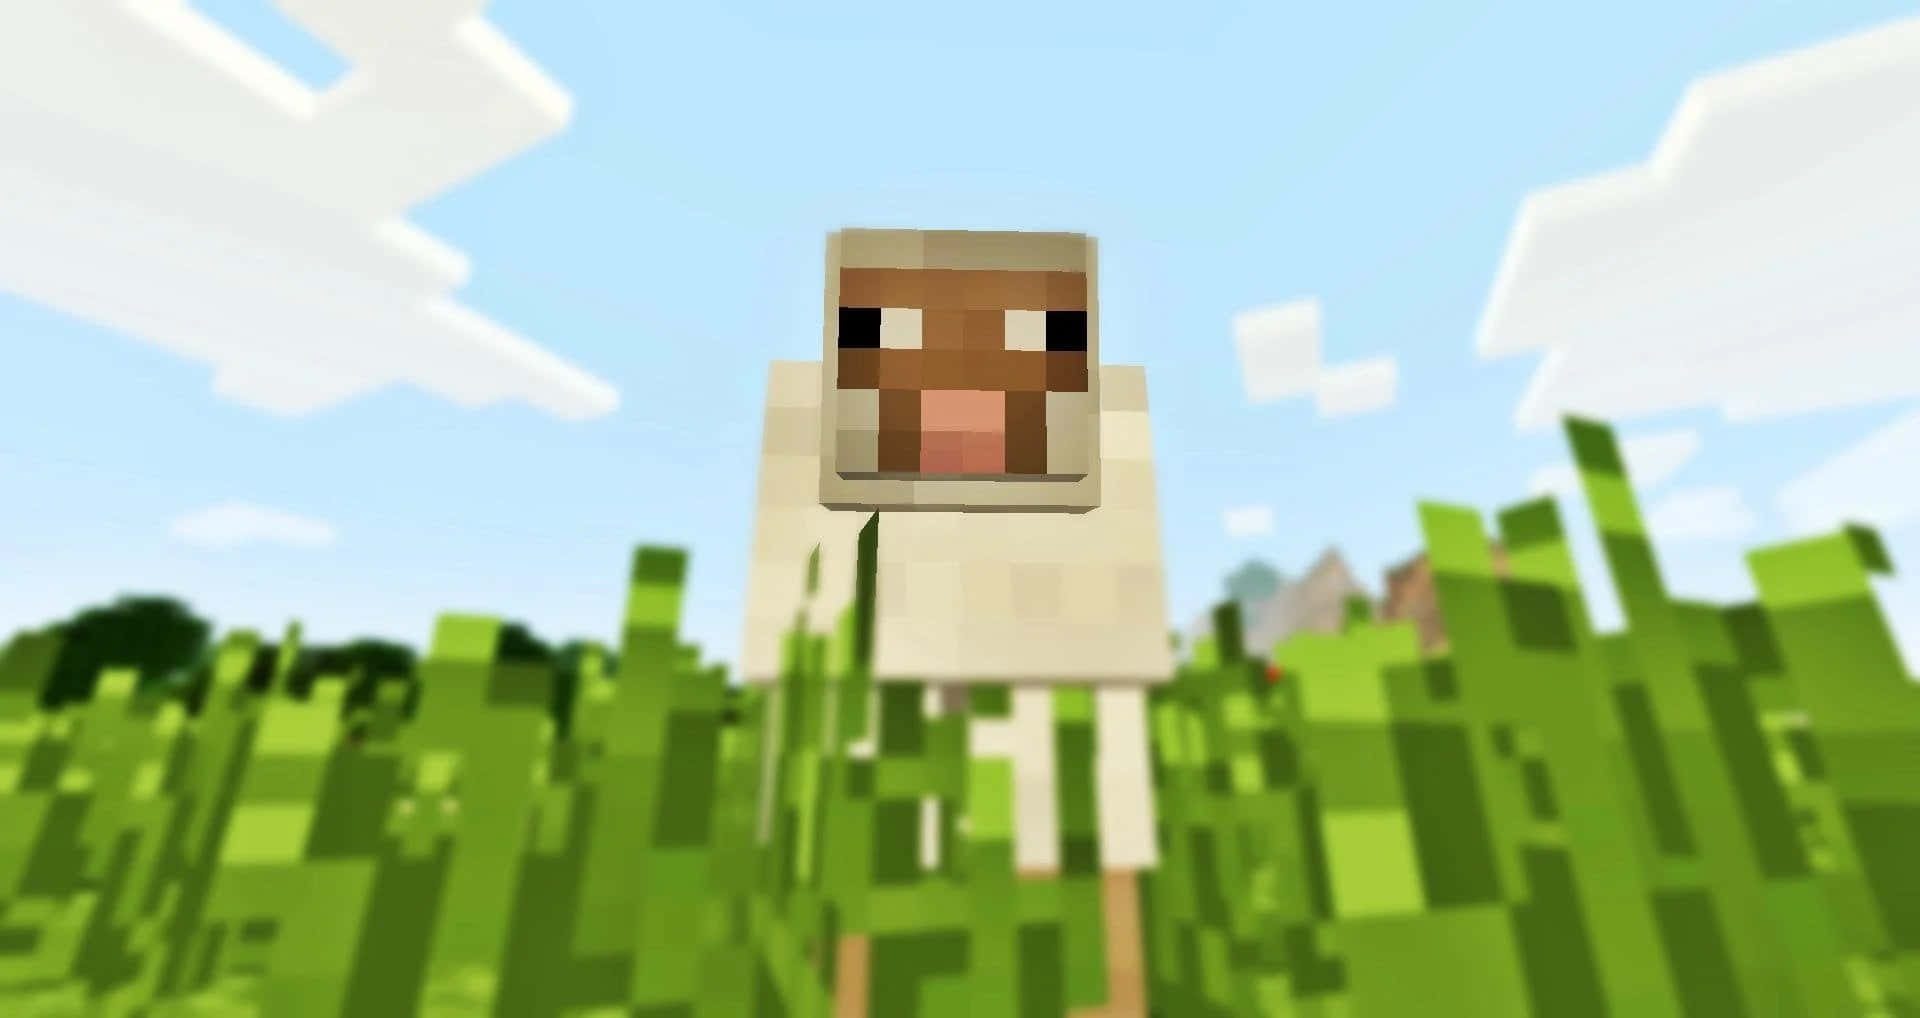 Colorful Minecraft Sheep in a Lush Green Field Wallpaper